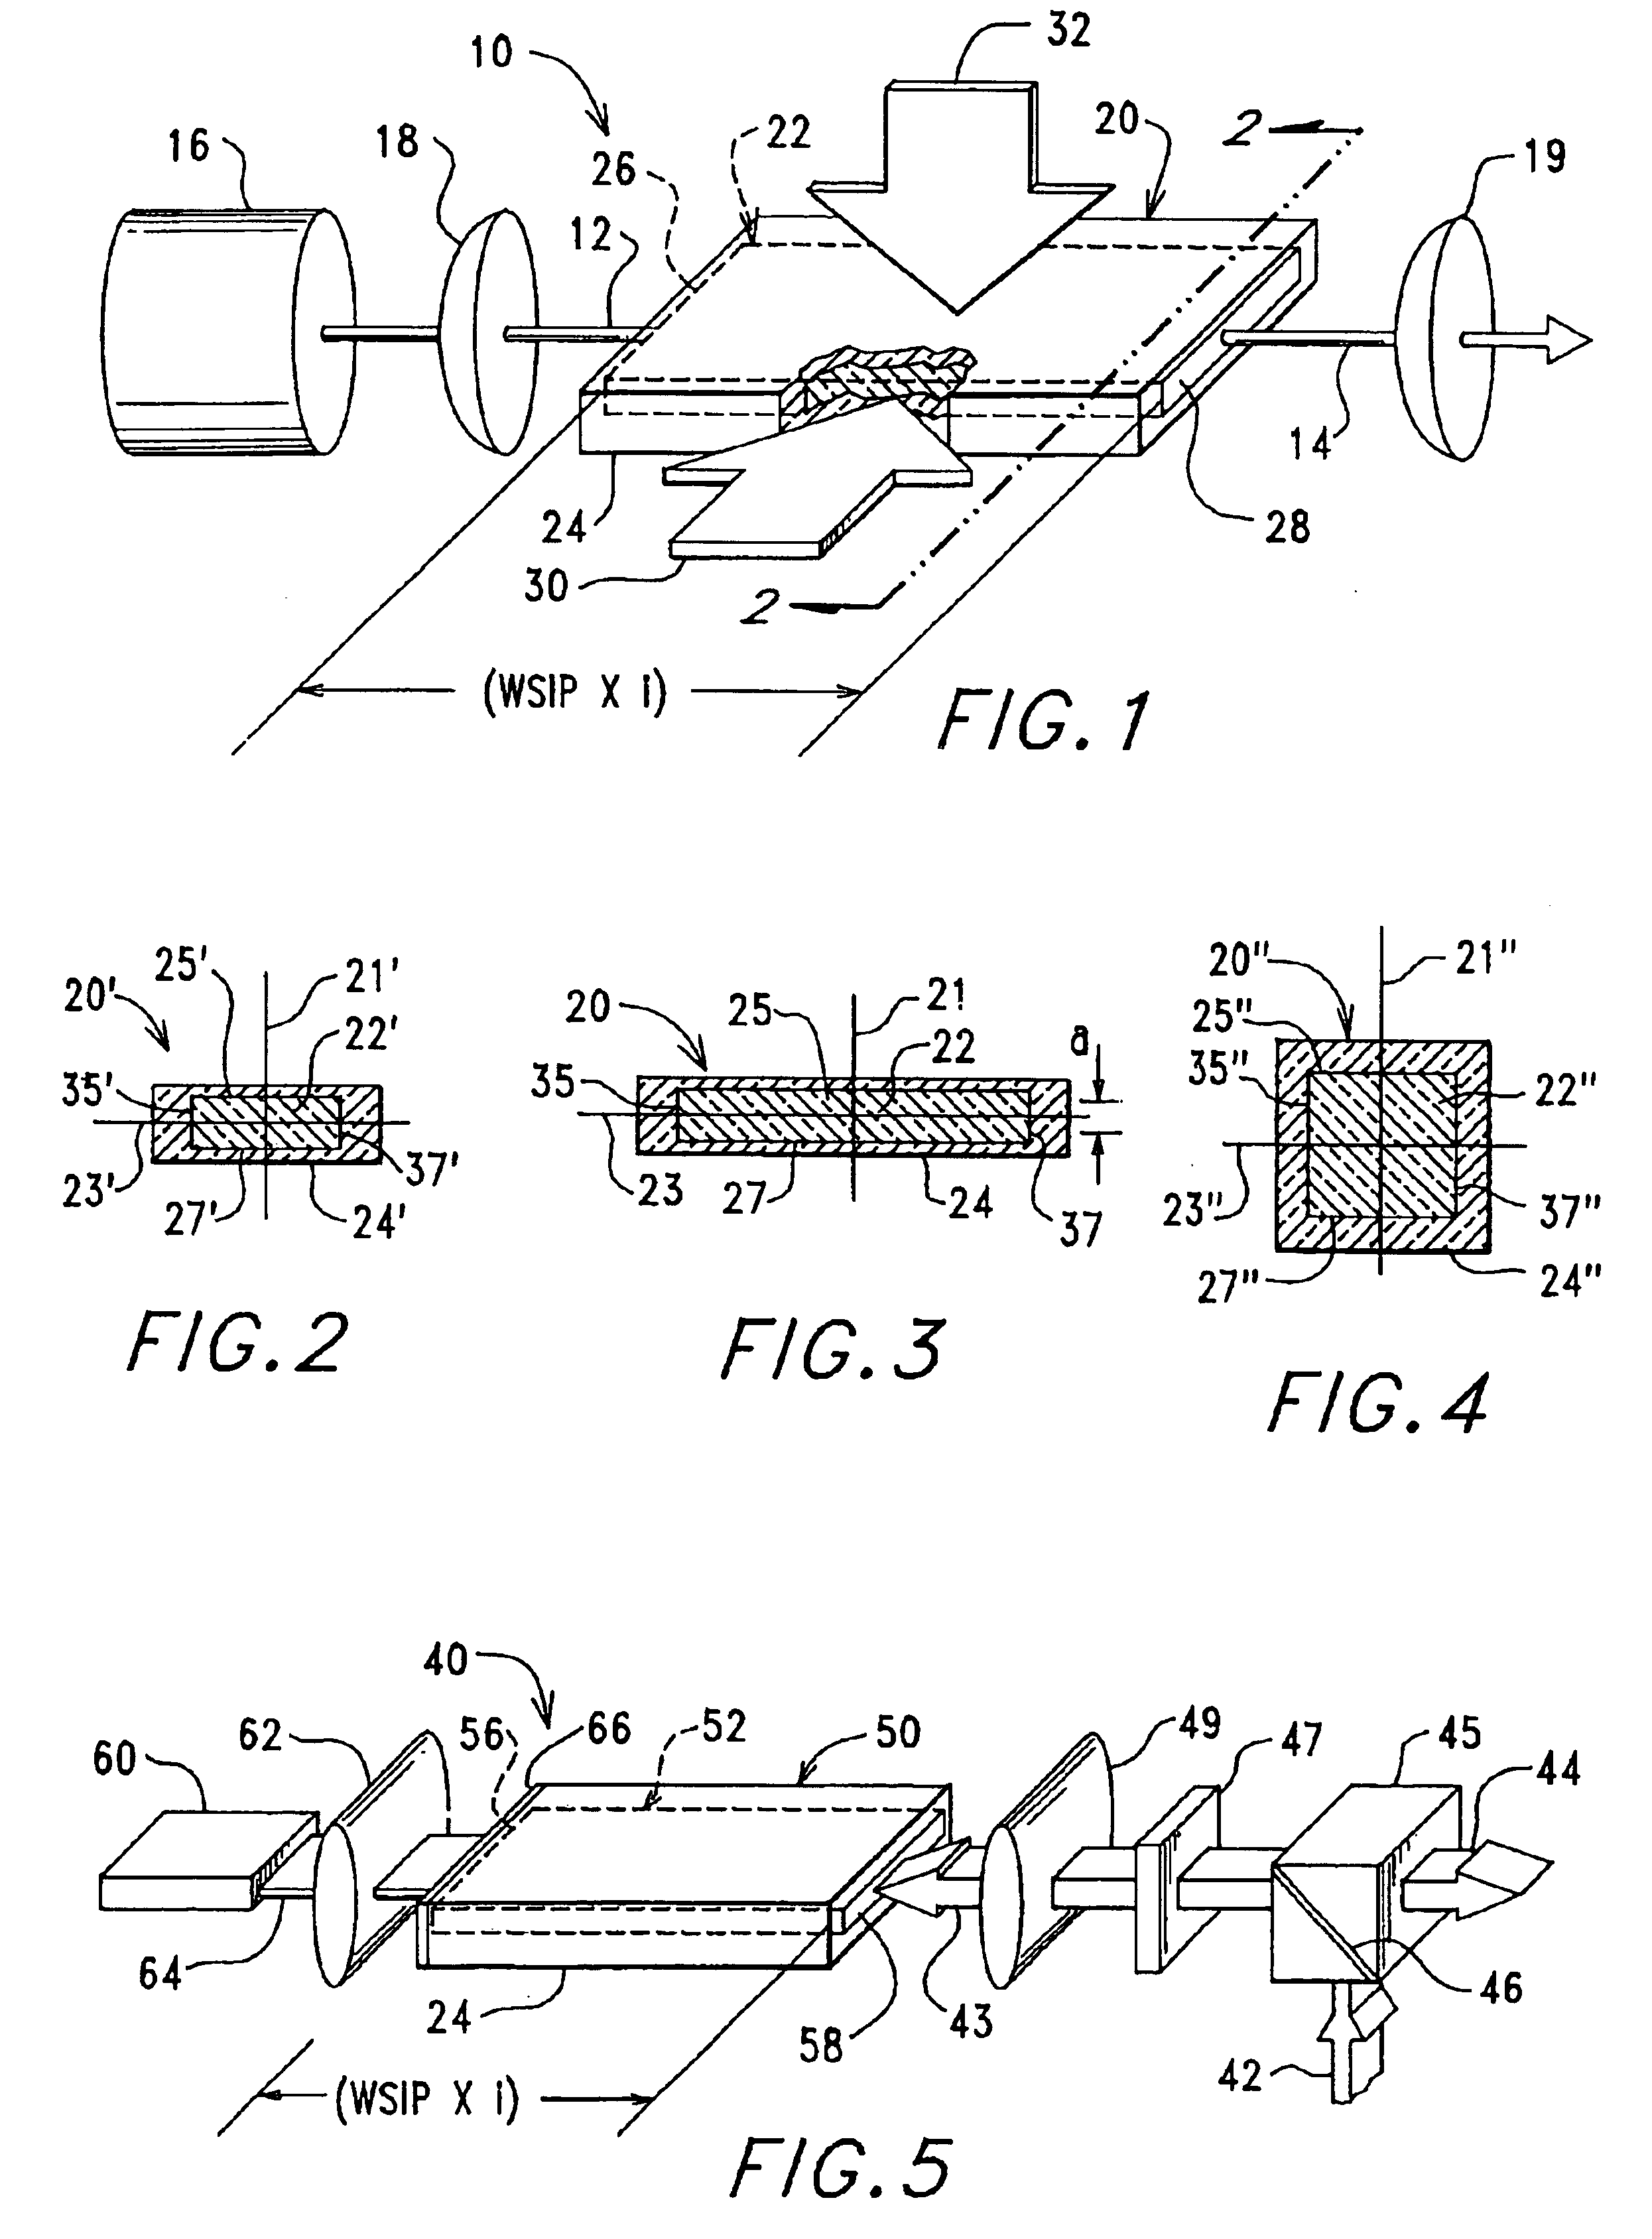 Power scalable waveguide amplifier and laser devices